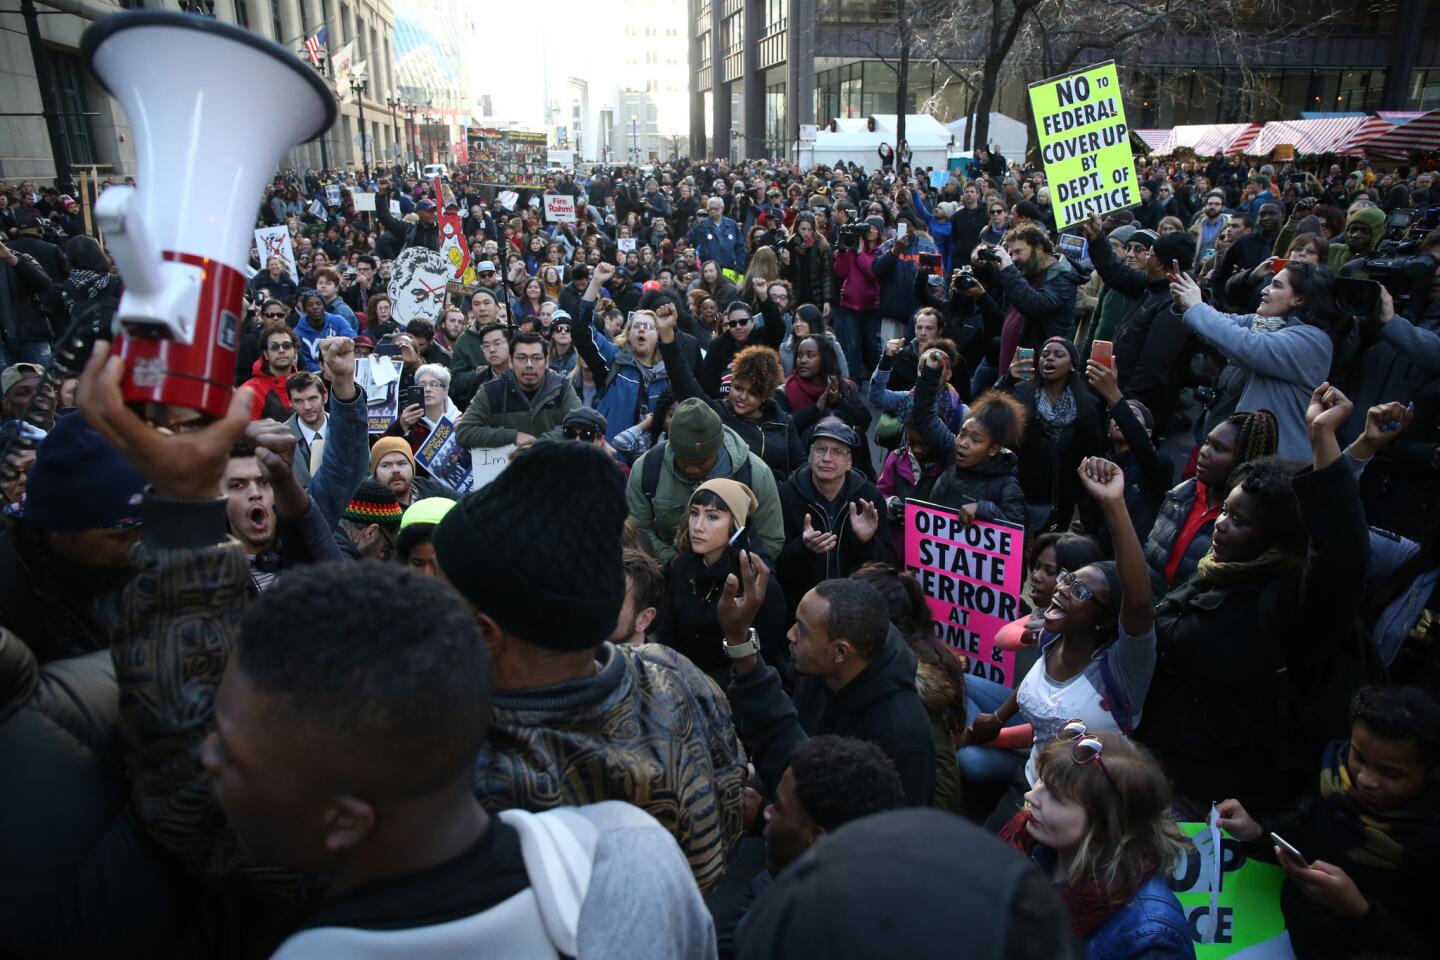 Protesters block traffic at Washington and Clark streets on Dec. 9, 2015, at about the same time Mayor Rahm Emanuel was issuing his apology.